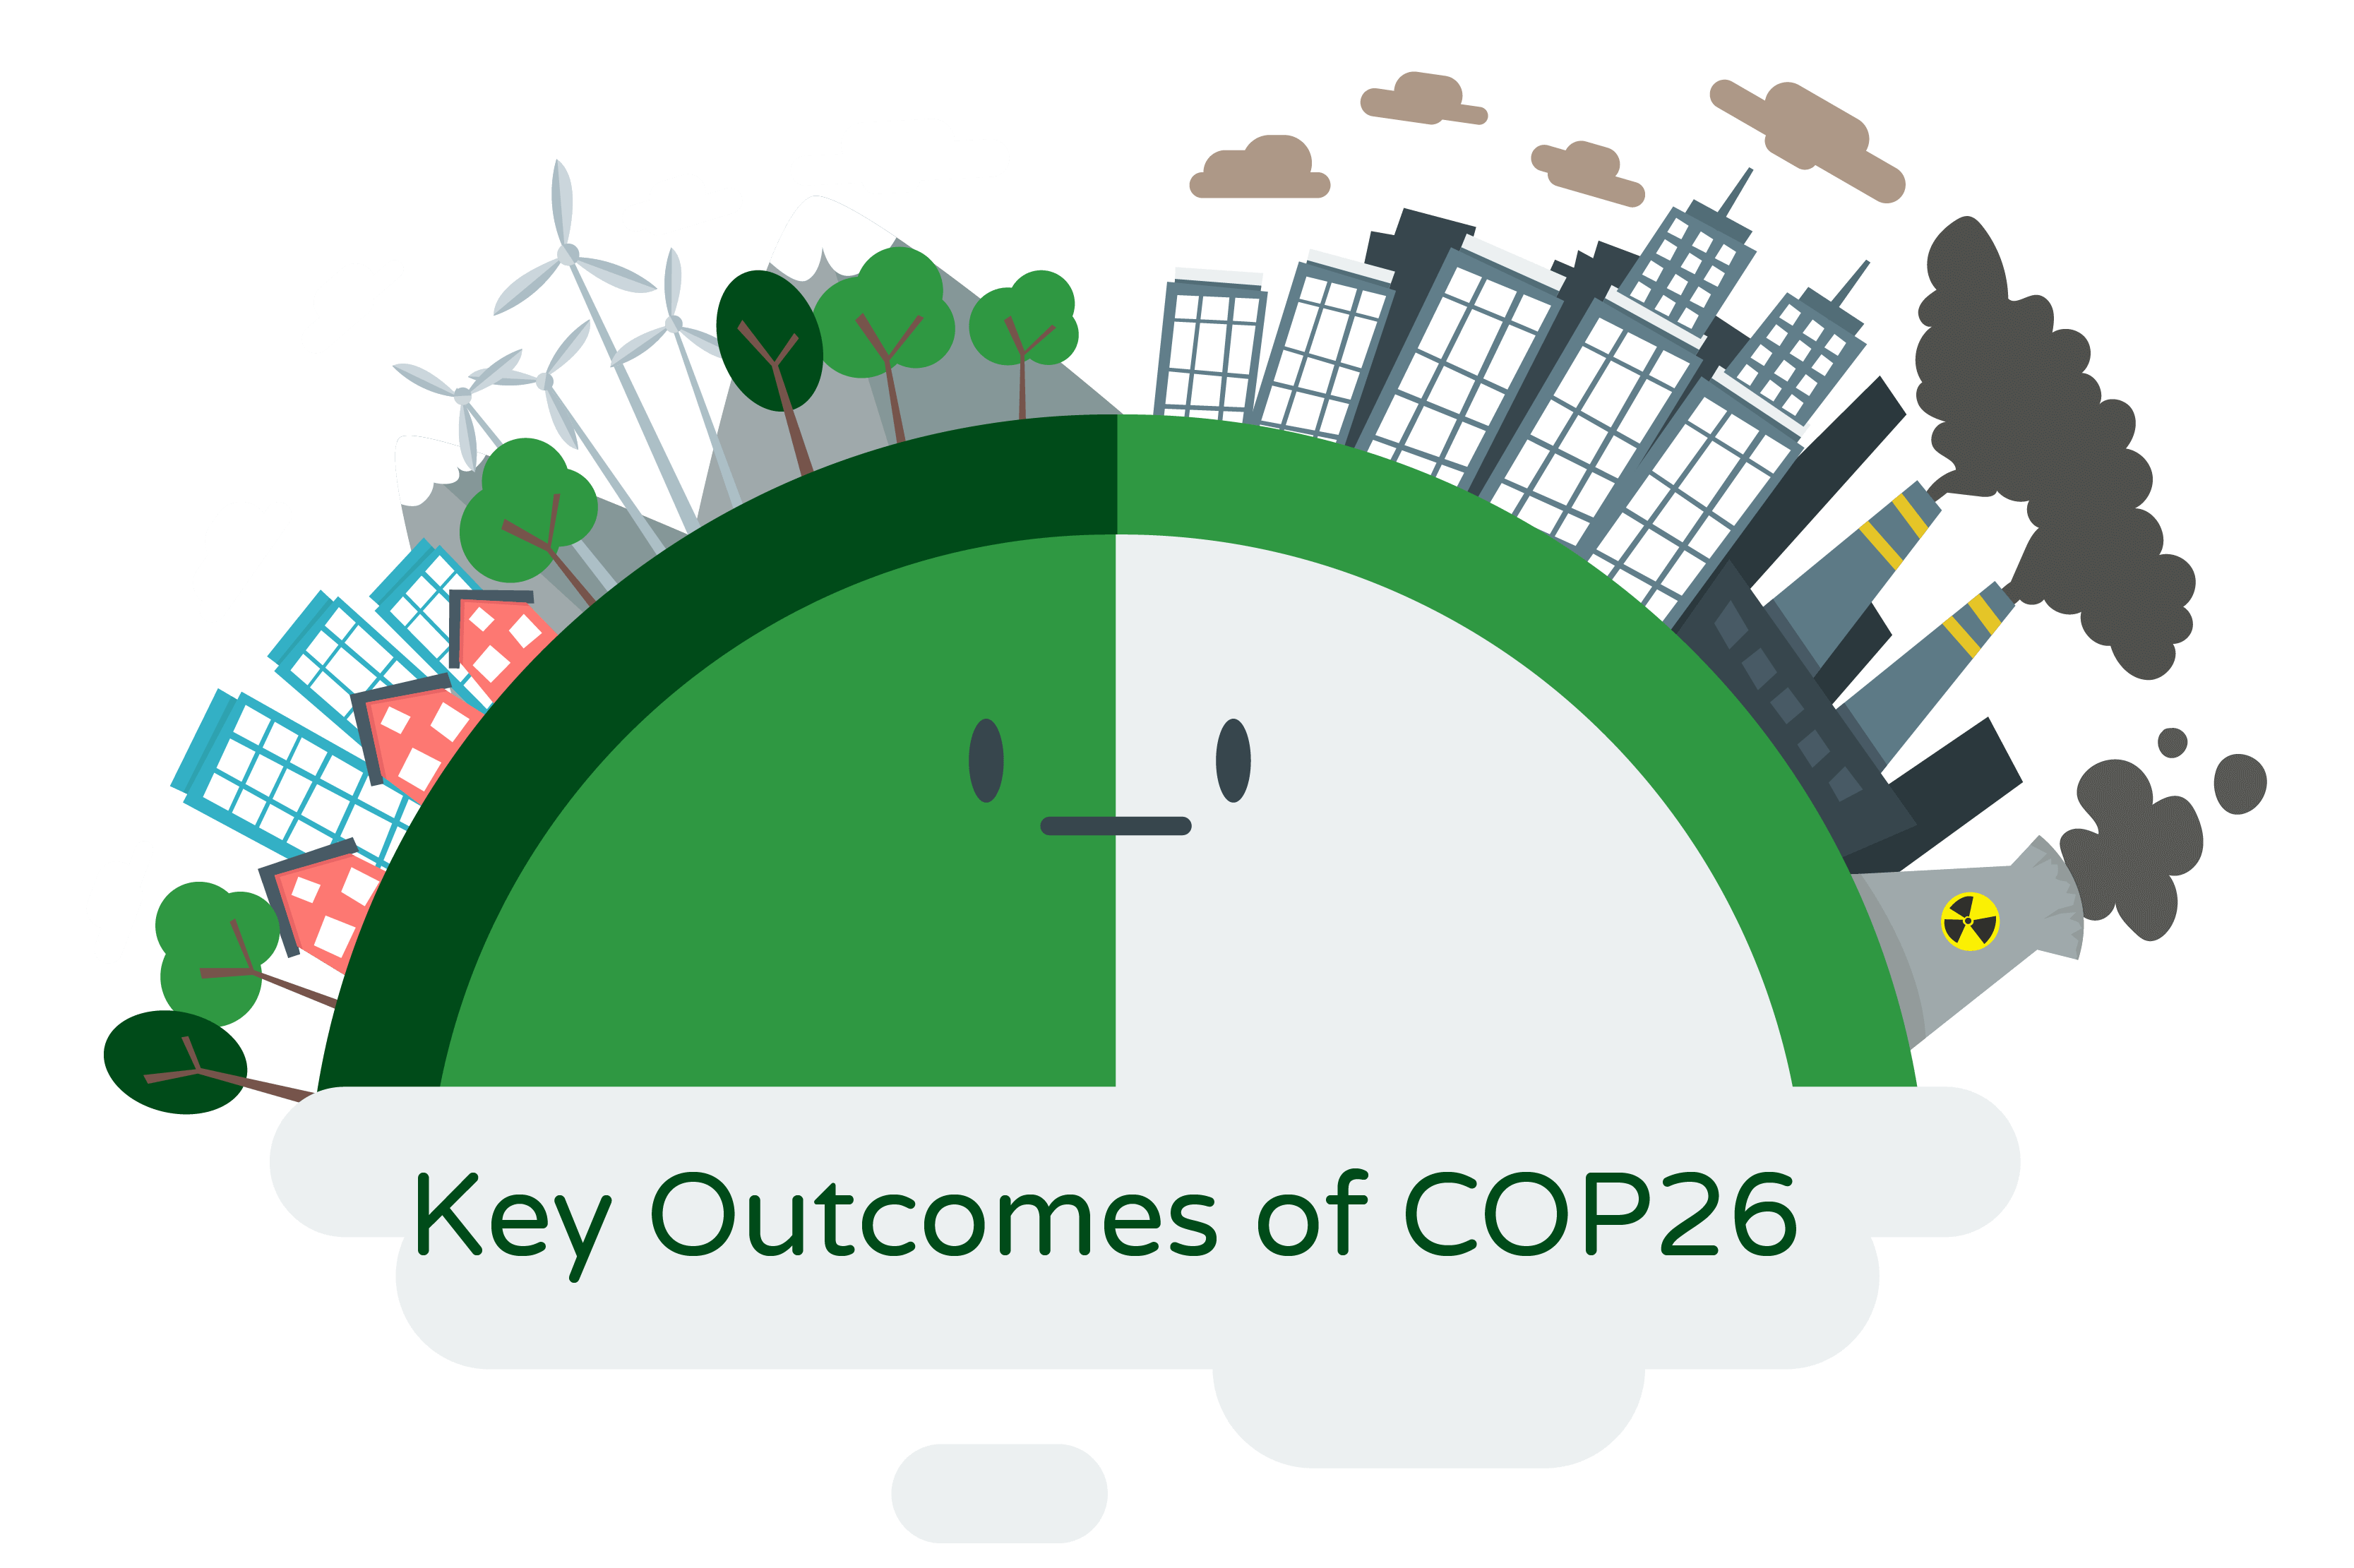 Illustration titled 'Key Outcomes of COP26.' The illustration features a half-circle-shaped glass symbolizing the outcomes of the Glasgow Climate Conference. One half of the glass represents a sustainable environment, depicted with vibrant colors, greenery, and clean air. The other half represents a polluted environment, portrayed with dark colors, smog, and distress. The illustration visually communicates the significant outcomes of COP26, highlighting the urgency and importance of taking action to address climate change and achieve a sustainable future.